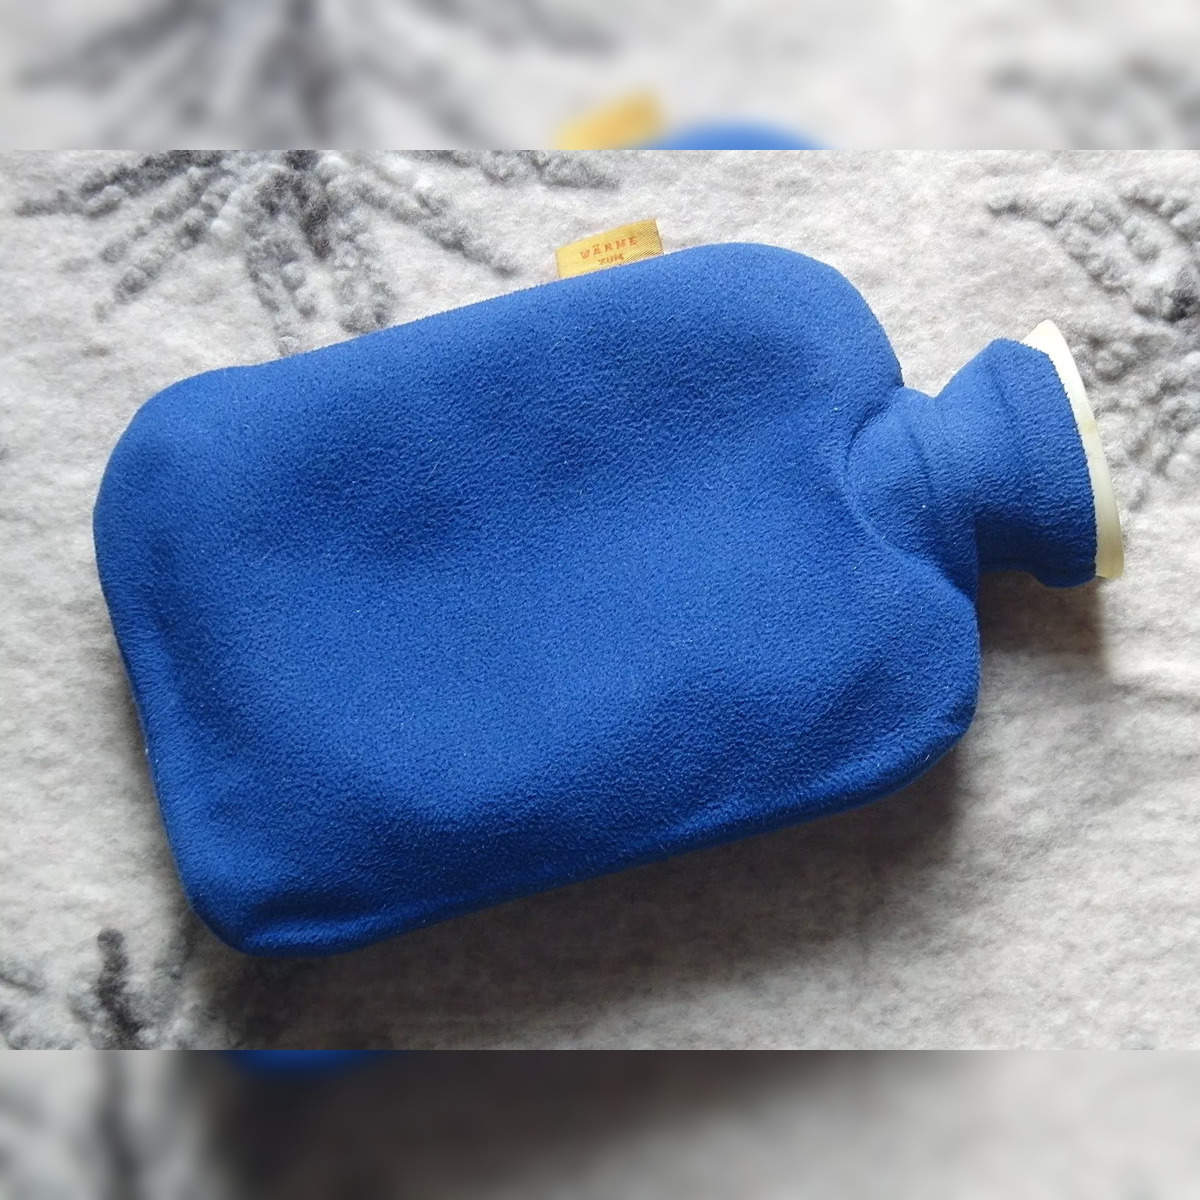 2 Liter Hot Water Bottle, Ease Aches and Pains Aid Comfort Sleep